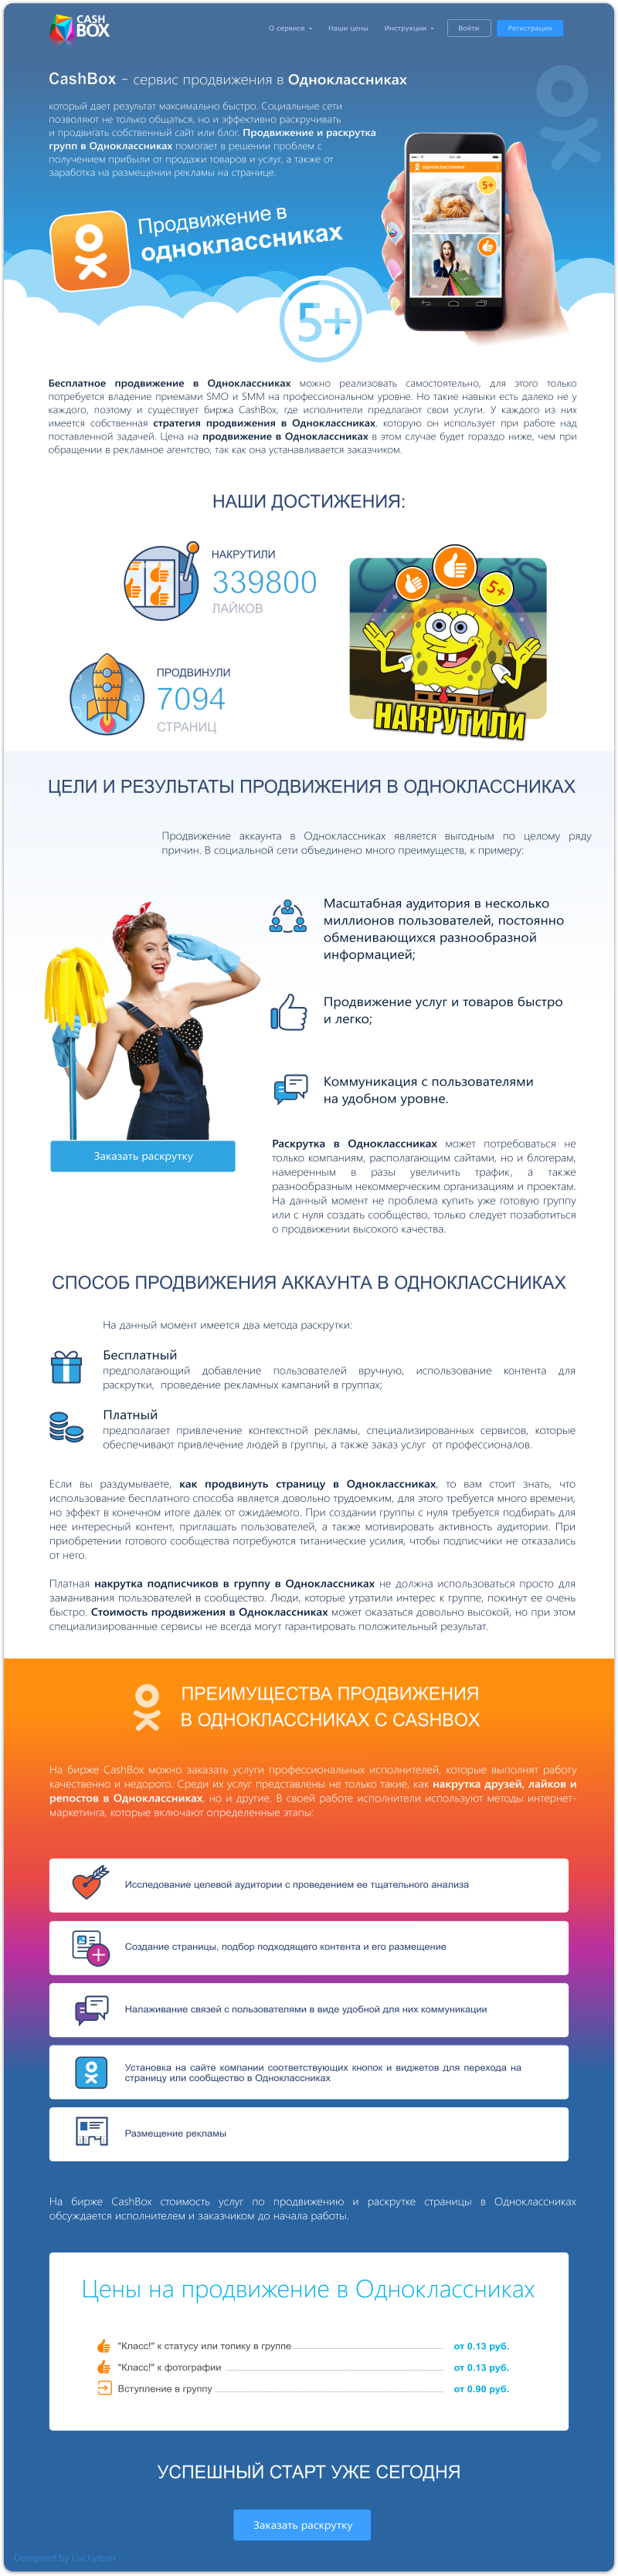 page of promotion and promotion of groups in Odnoklassniki